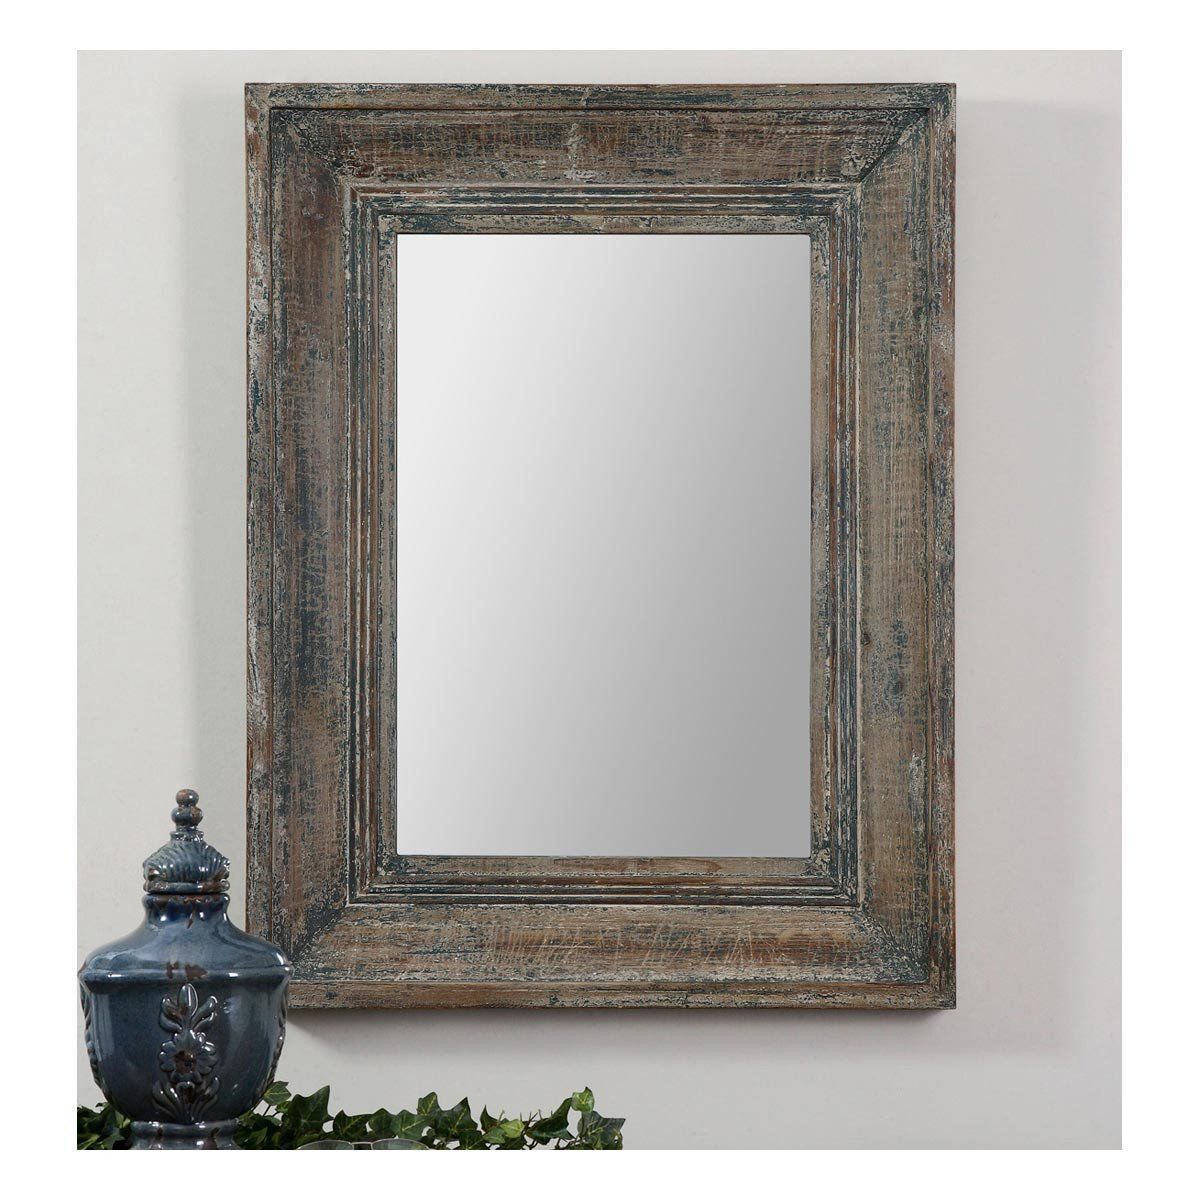 Frame Features A Heavily Distressed, Blue Green Finish With Aged Wood Pertaining To Kristy Rectangular Beveled Vanity Mirrors In Distressed (View 2 of 15)